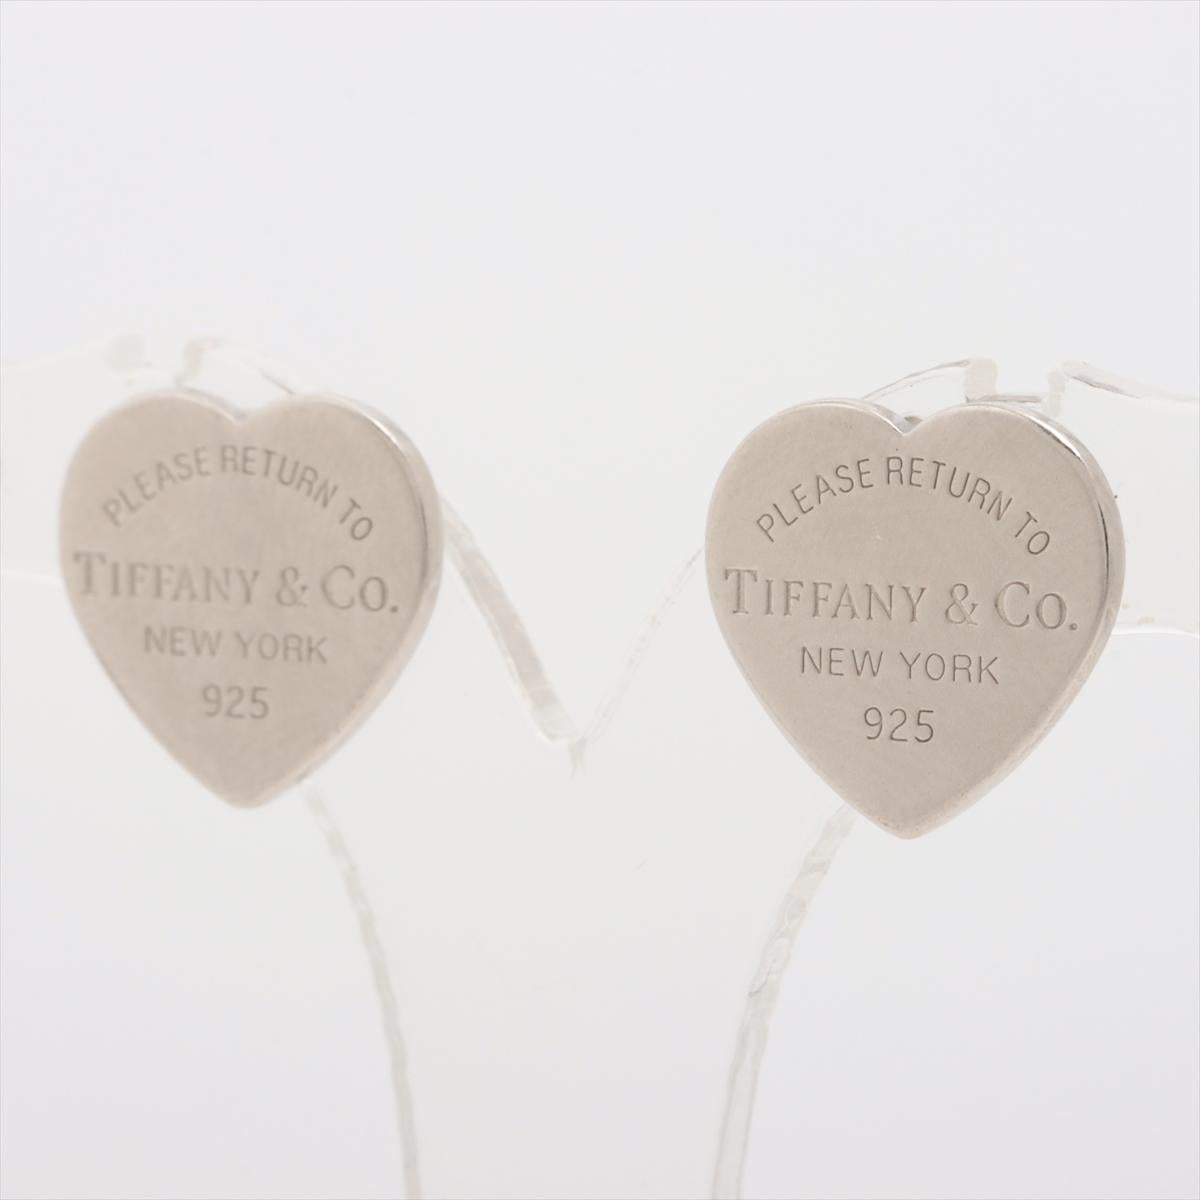 The Tiffany & Co. Return To Tiffany Heart Tag Stud Earring in Silver is a timeless and elegant accessory that exudes sophistication. Crafted from high-quality sterling silver, the stud earrings feature the iconic Return To Tiffany heart tag design,